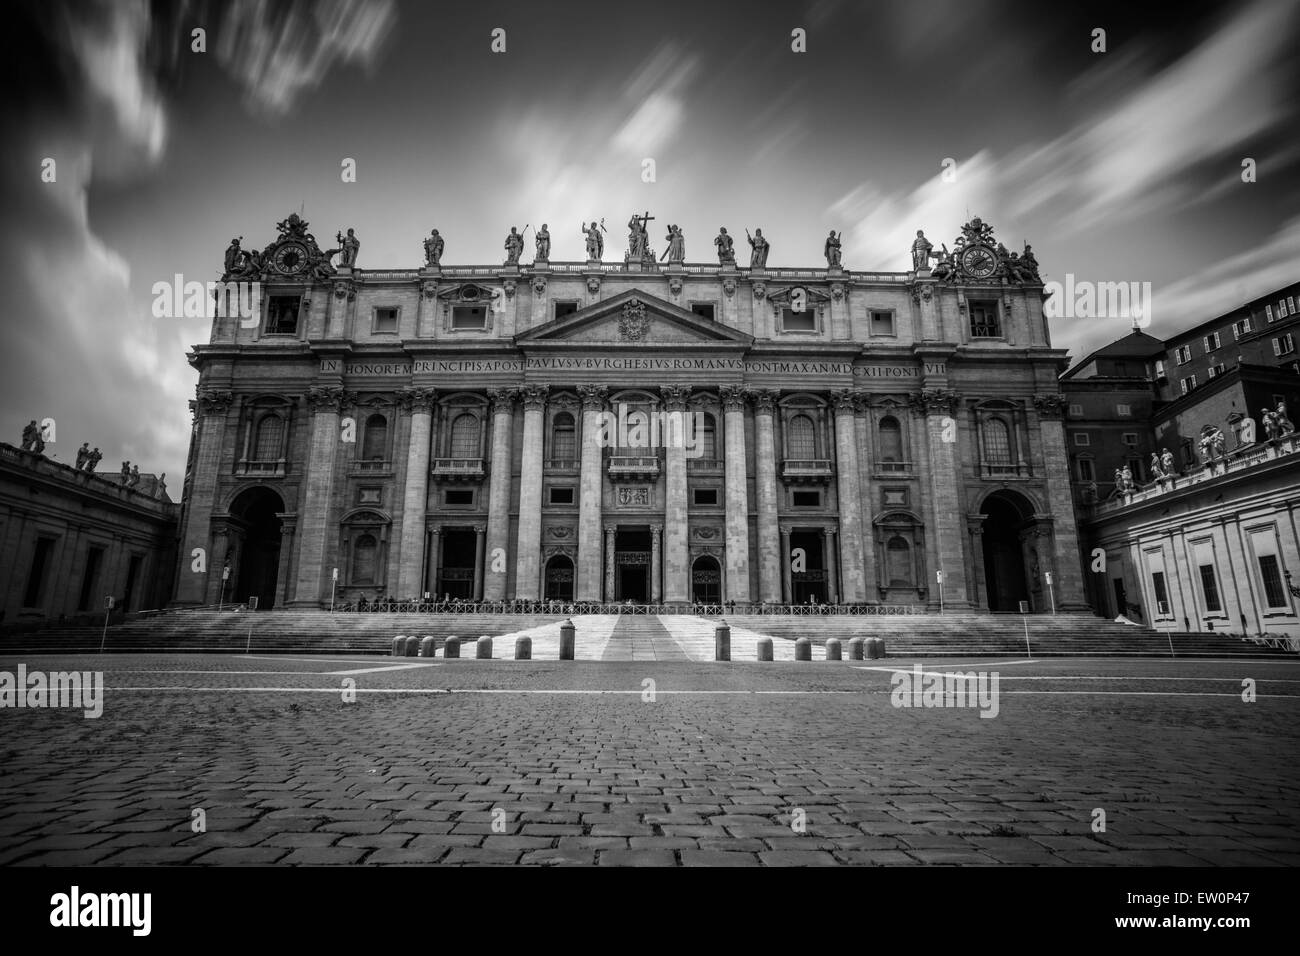 St Peter's Basilica in Vatican City, Italy. Shot with ND filter Stock Photo